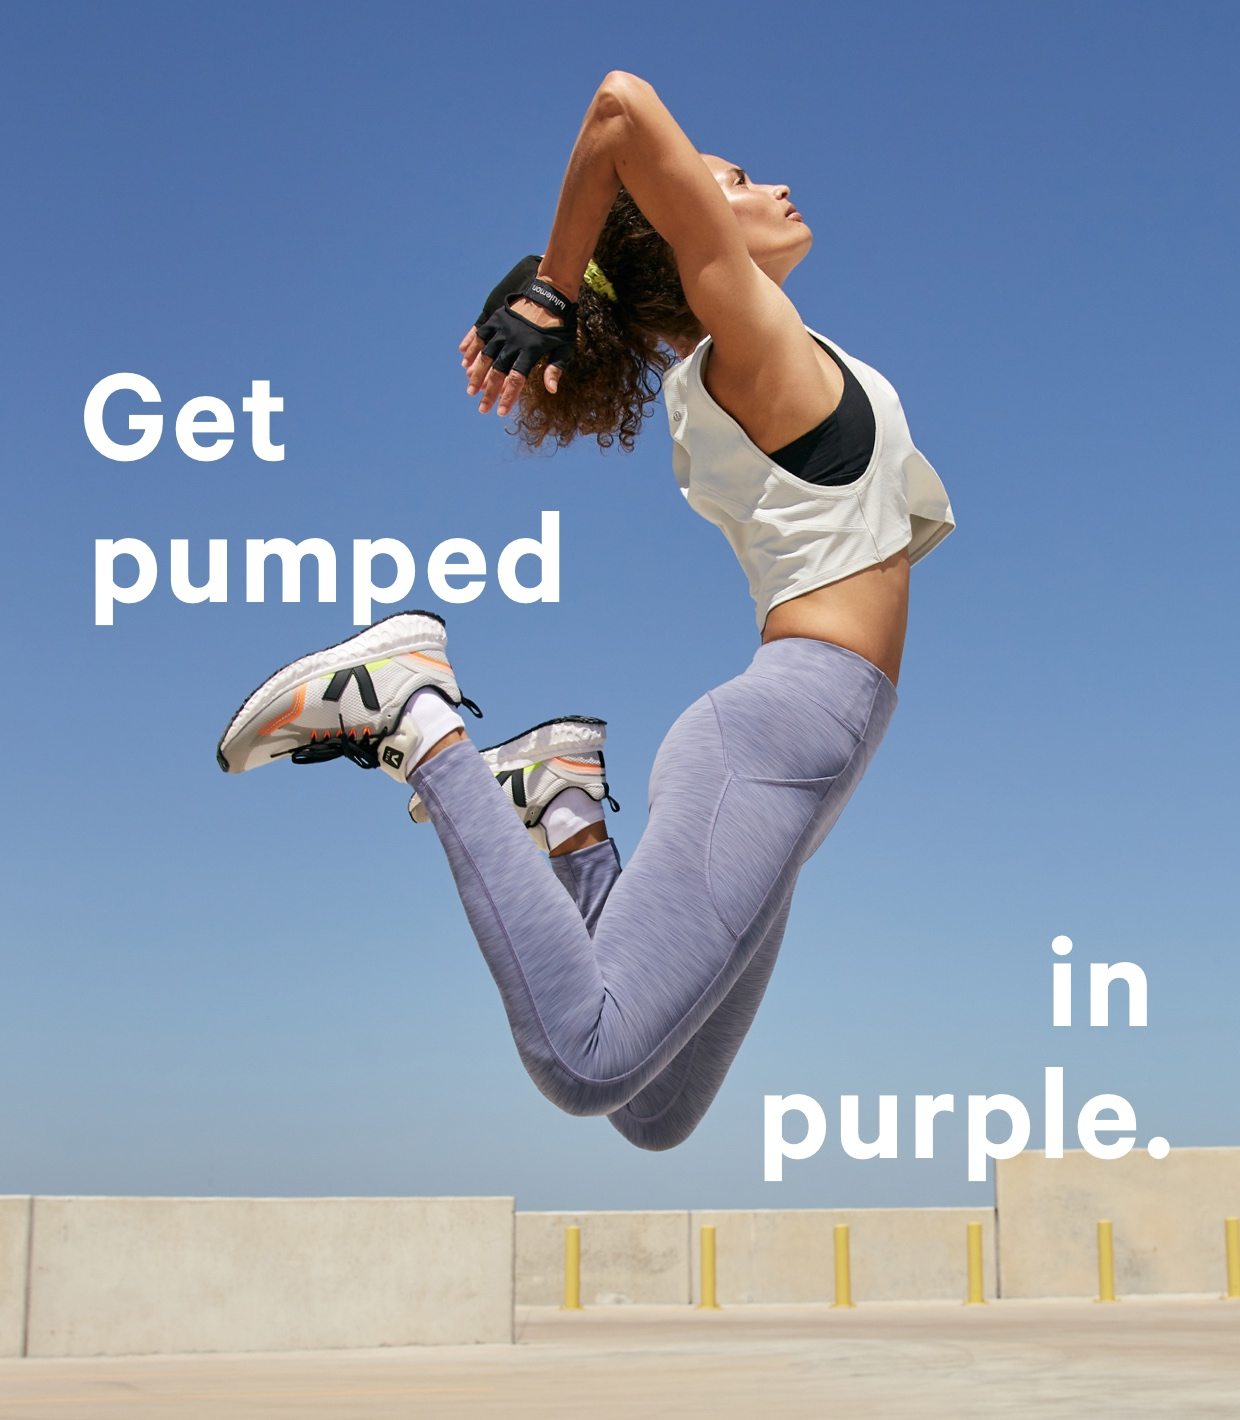 Get pumped in purple. - SHOP WHAT'S NEW